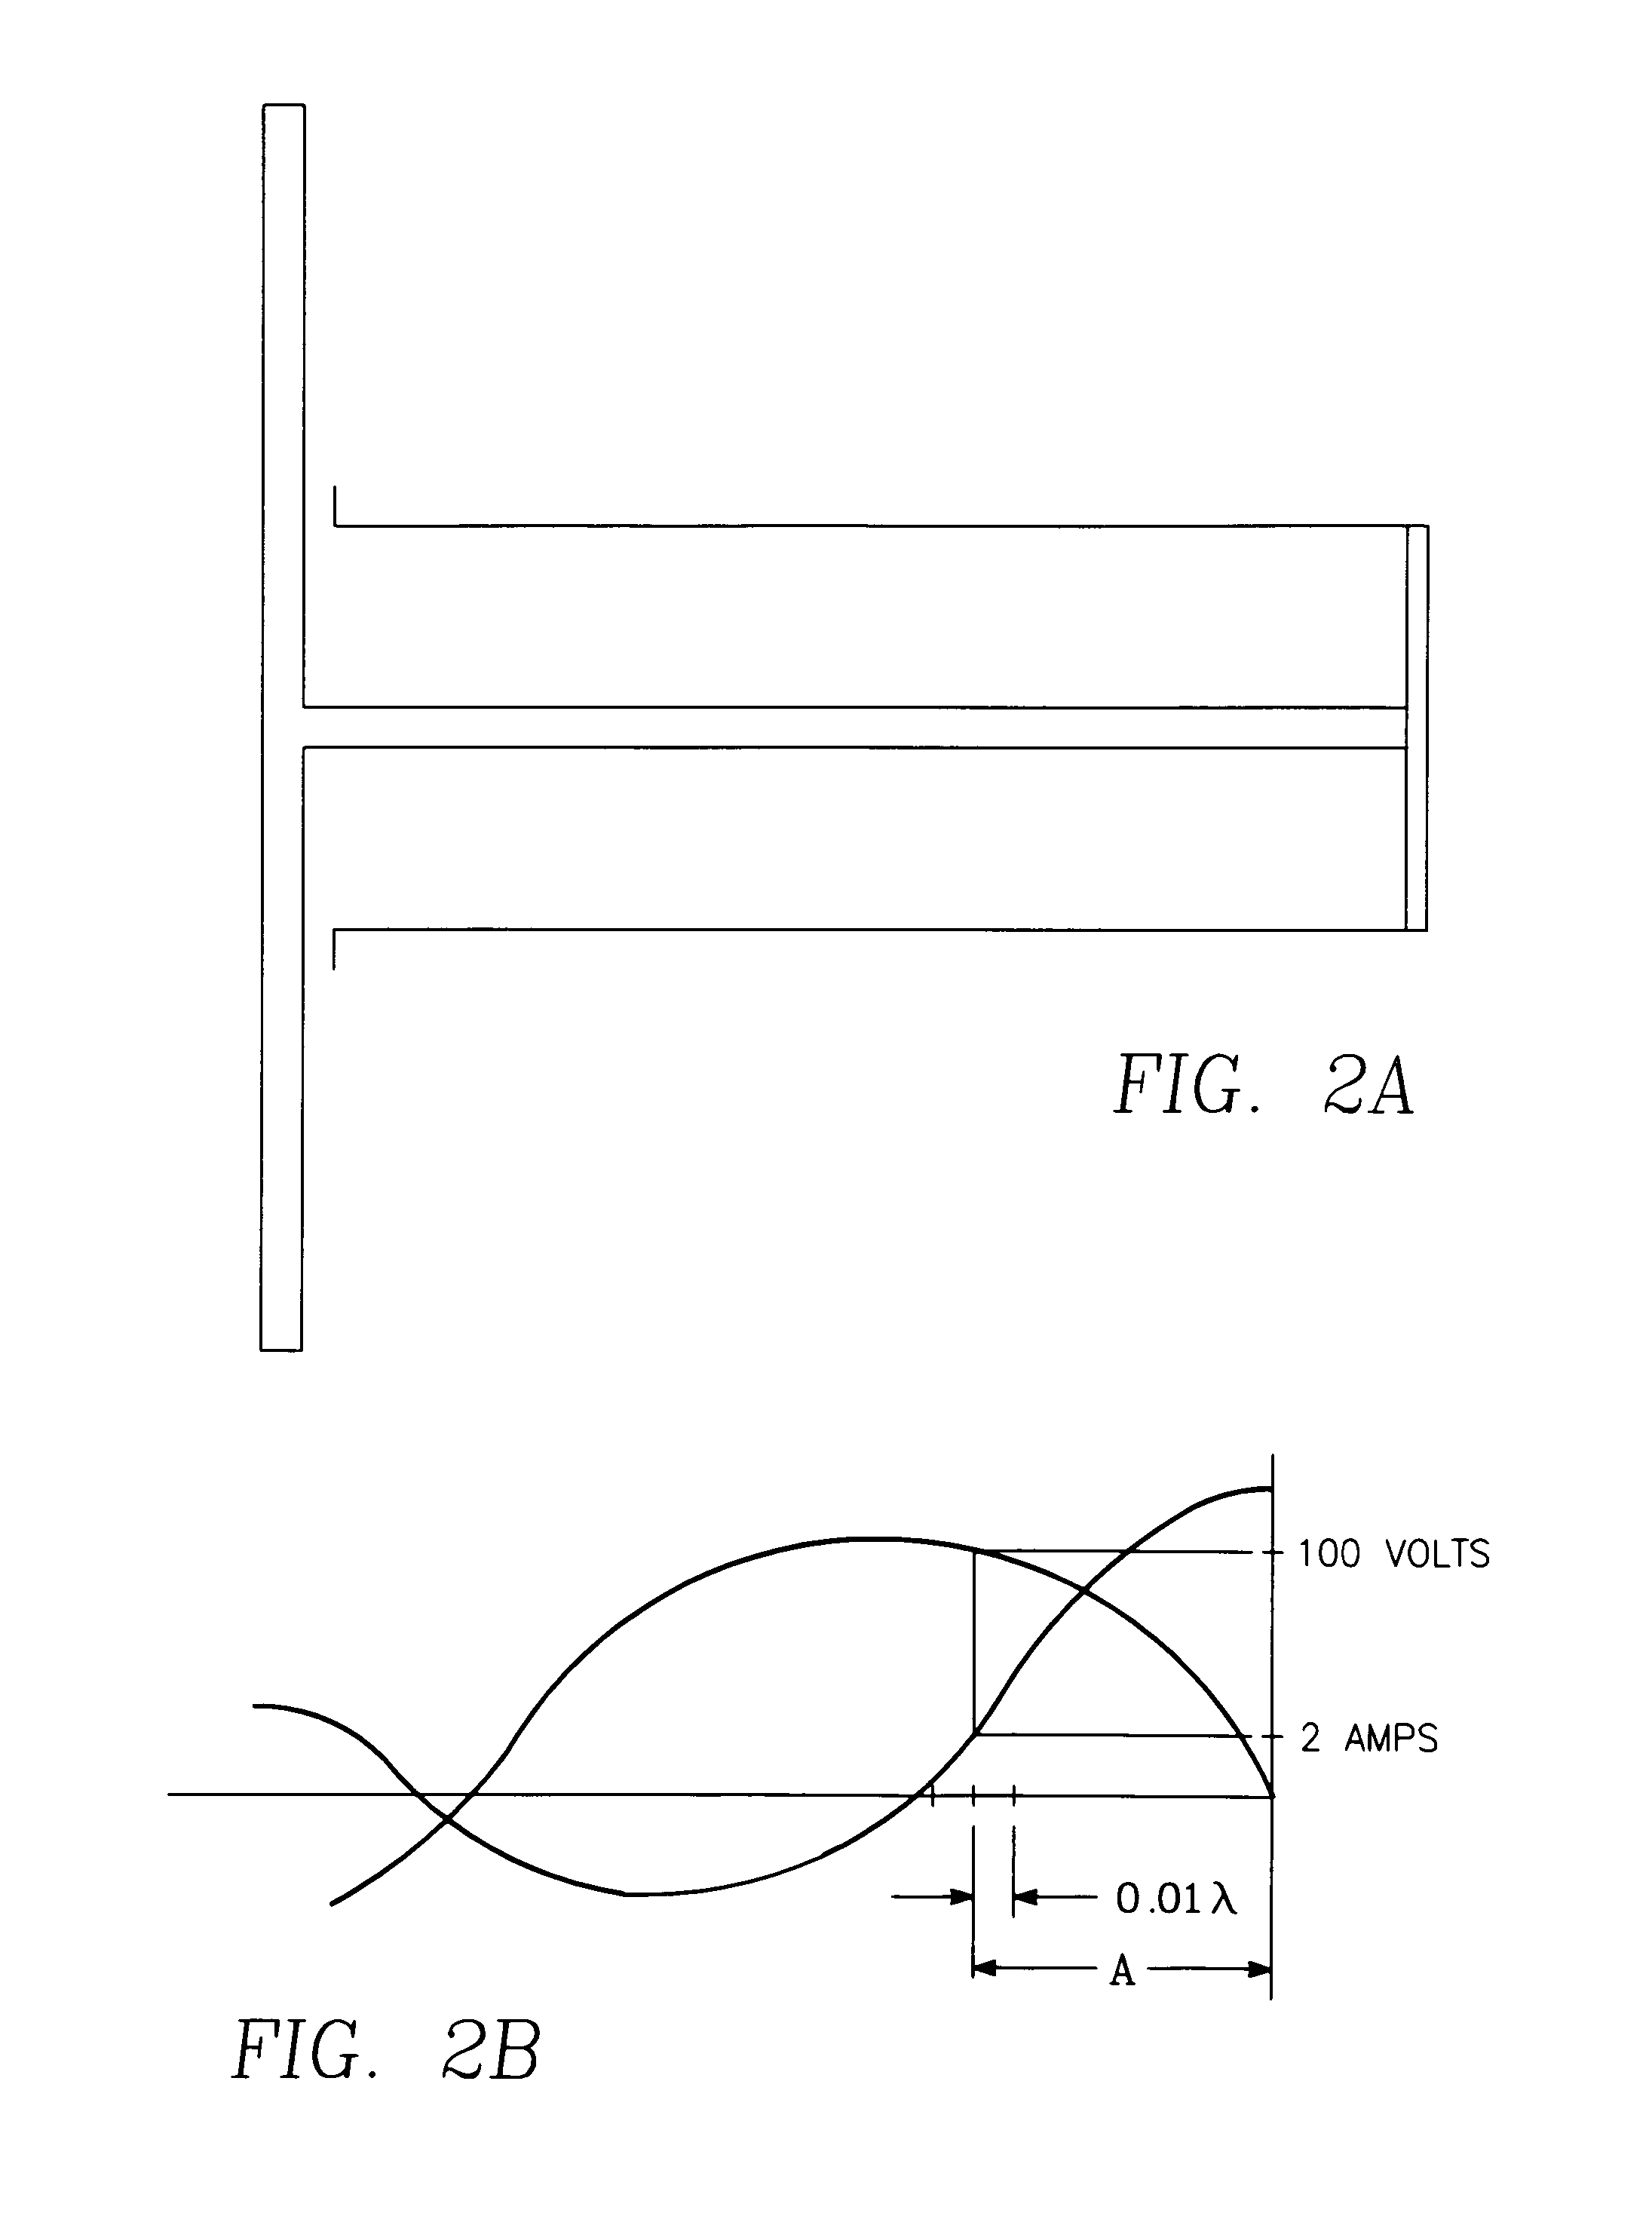 Plasma reactor overhead source power electrode with low arcing tendency, cylindrical gas outlets and shaped surface